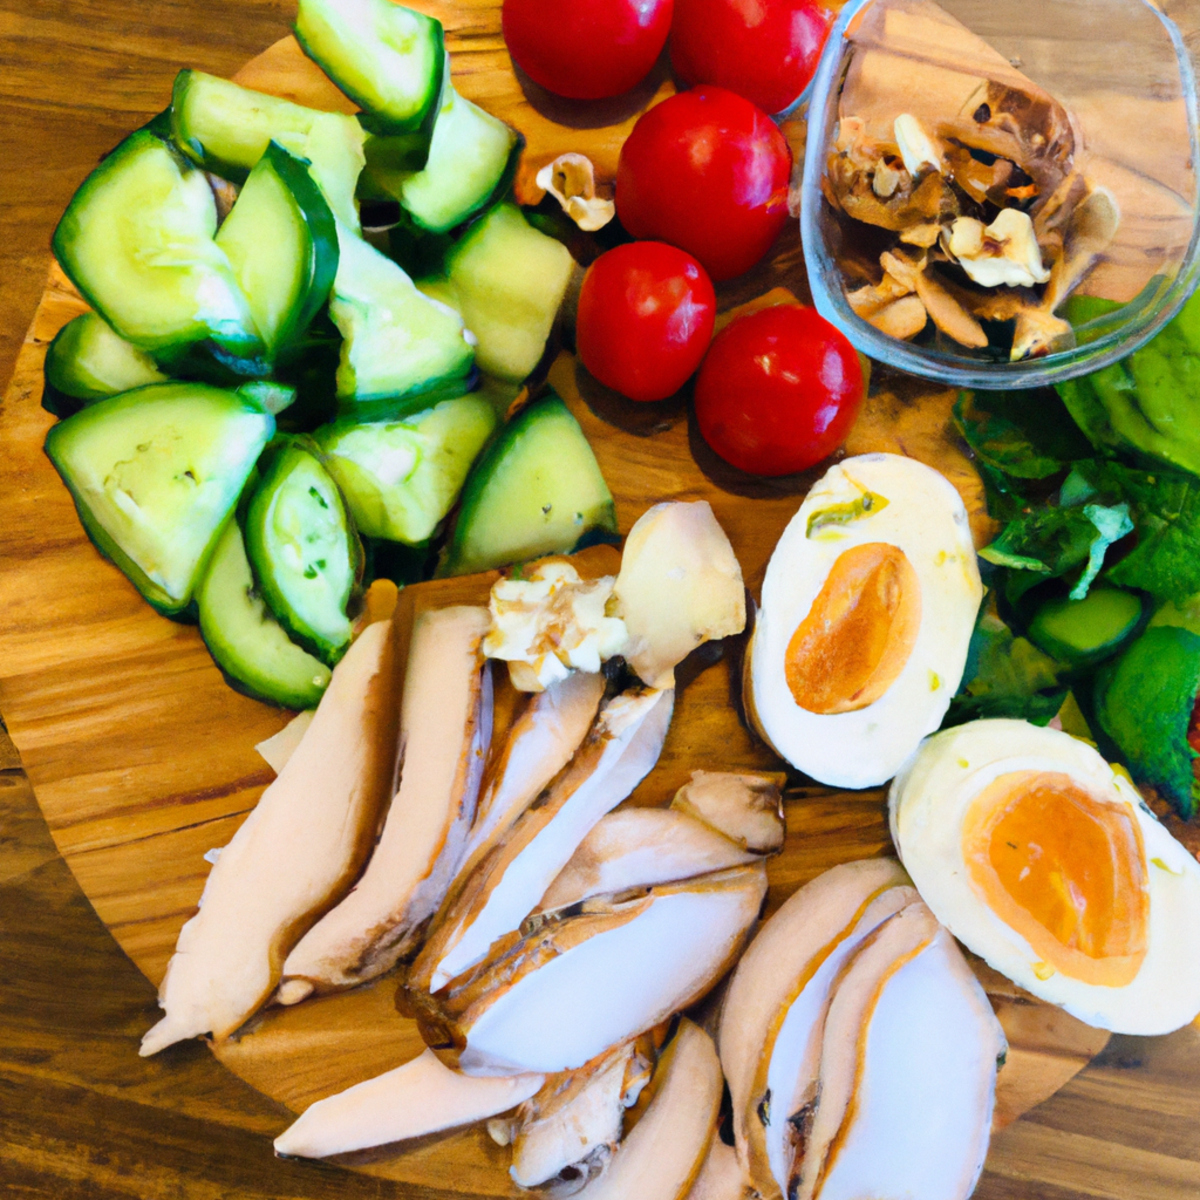 The photo features a wooden cutting board with various keto-friendly foods arranged in an artful display. Slices of avocado, hard-boiled eggs, and grilled chicken breast are interspersed with cherry tomatoes, cucumber rounds, and a handful of mixed nuts. A small dish of olive oil and balsamic vinegar sits nearby, ready to be drizzled over the salad. The vibrant colors and textures of the ingredients make the dish look both delicious and nutritious, a perfect fuel for a high-intensity workout.